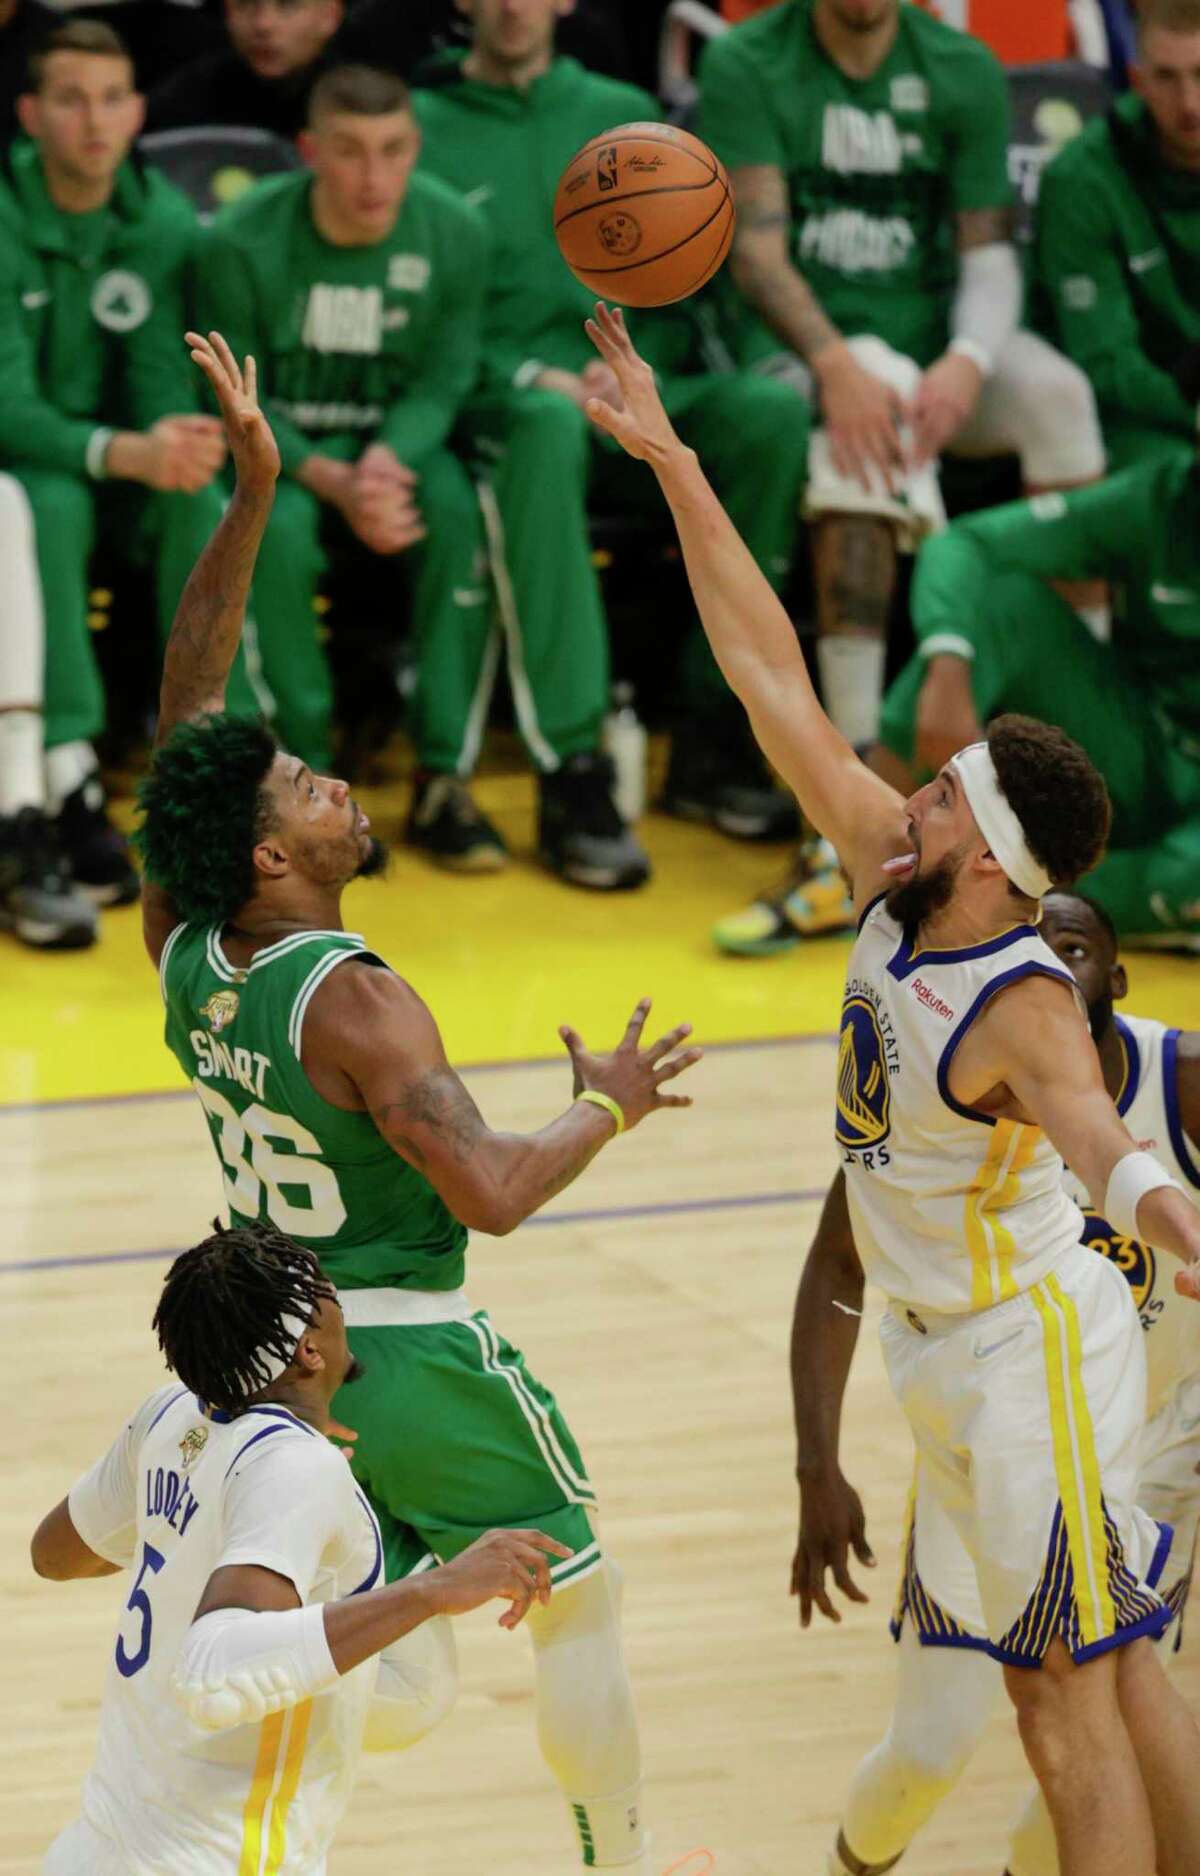 Boston Celtics' Marcus Smart, 36, shoots over Golden State Warriors' Klay Thompson, 11, during the fourth quarter of the NBA Finals at Chase Center in San Francisco, Calif., on Thursday, June 2, 2022.